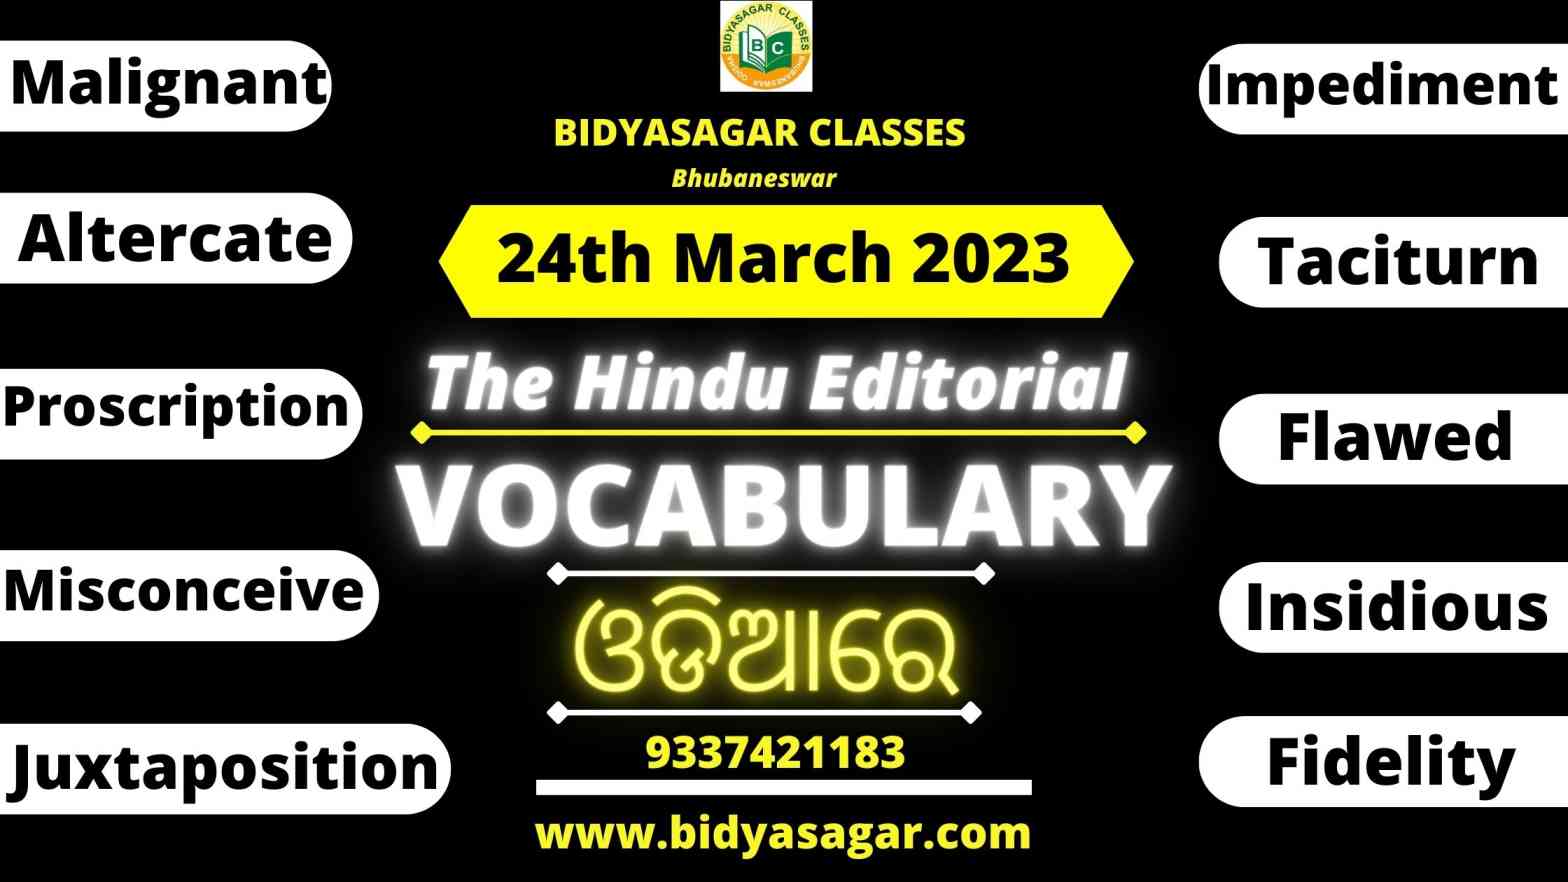 The Hindu Editorial Vocabulary of 24th March 2023